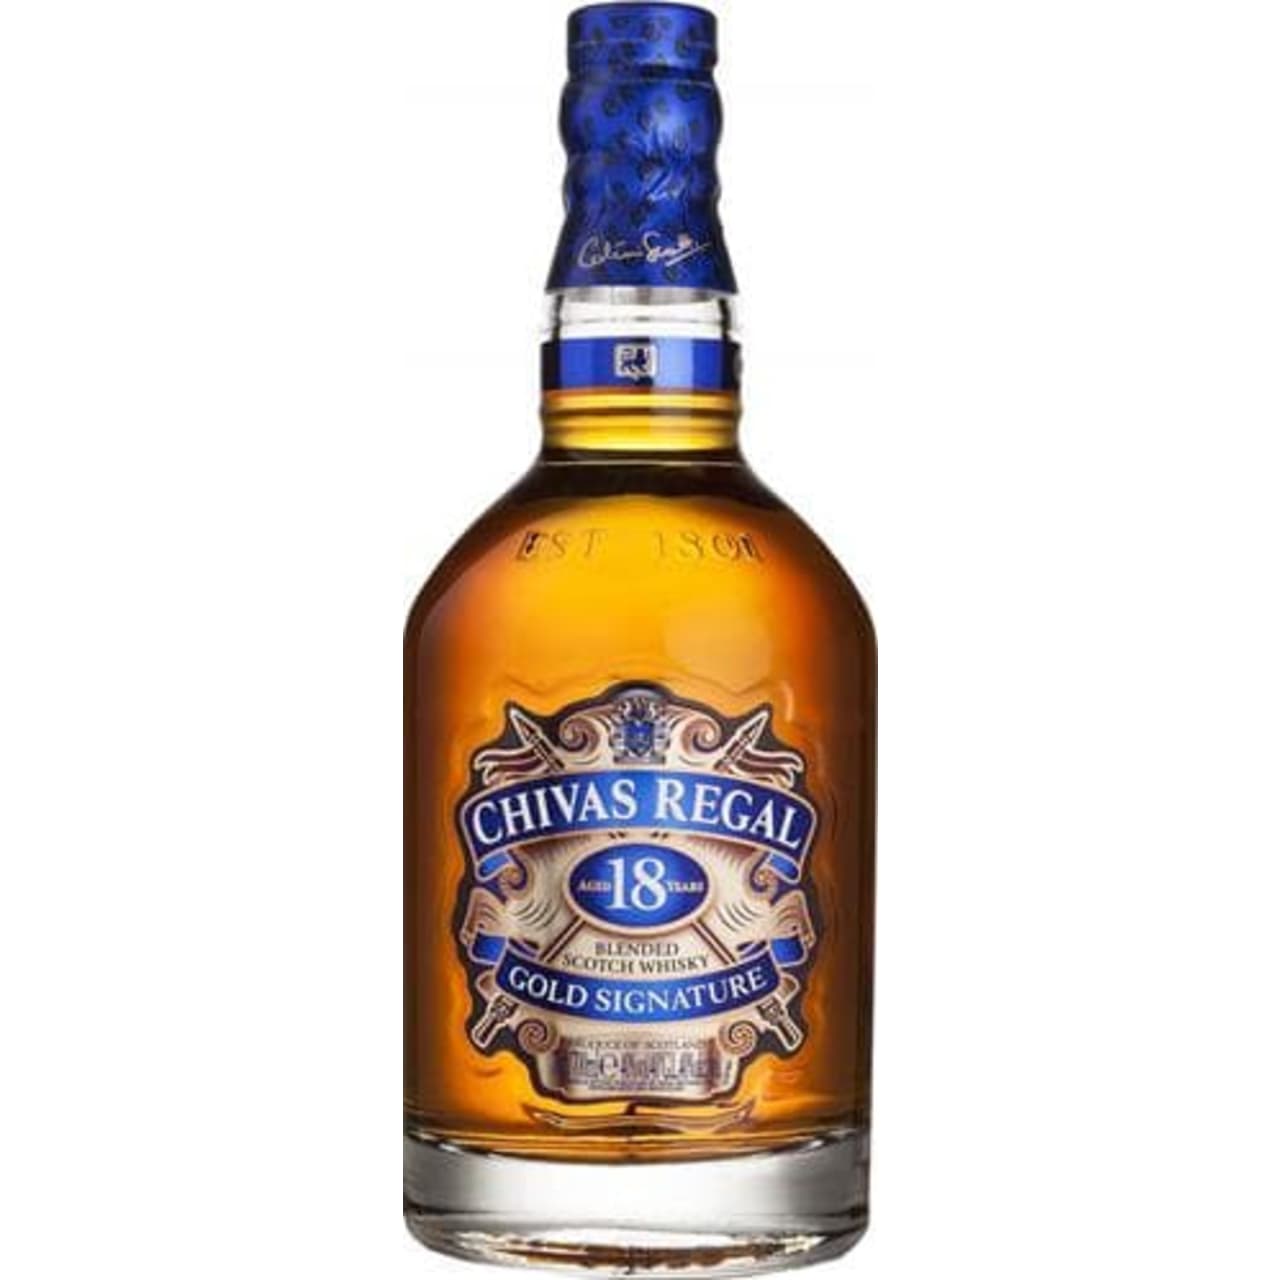 Product Image - Chivas Regal 18 Year Old Scotch Whisky